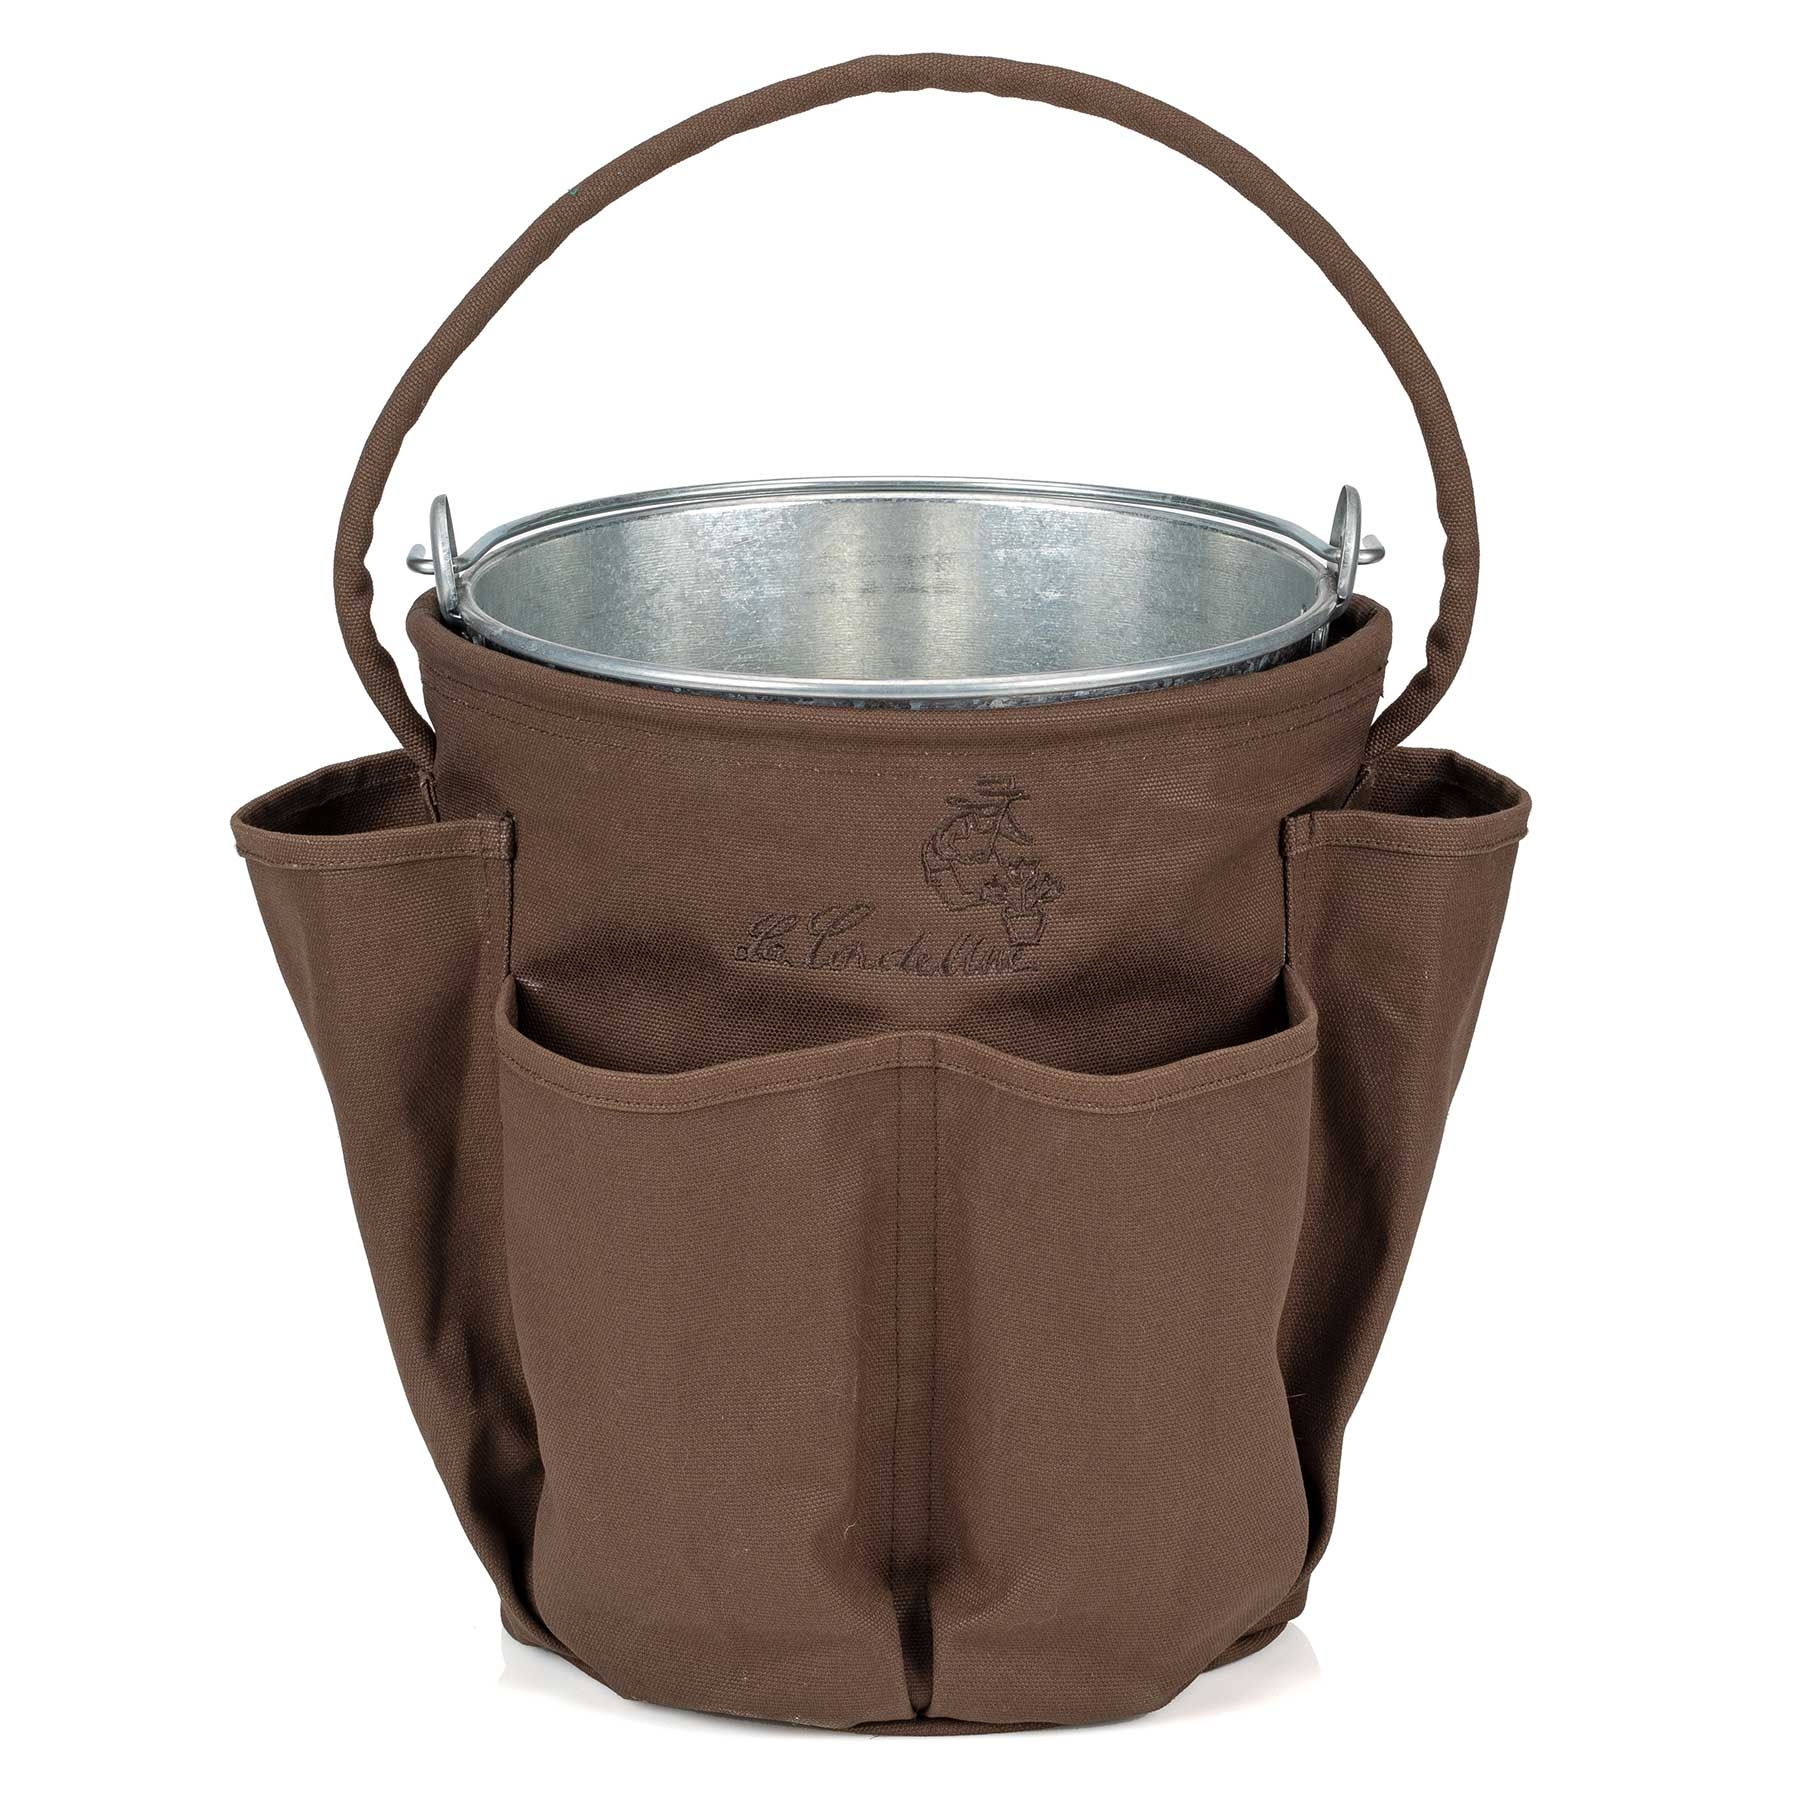 Water Bucket Bag with 6 Pockets, Embroidered, with a 13 L Galvanised Steel Bucket